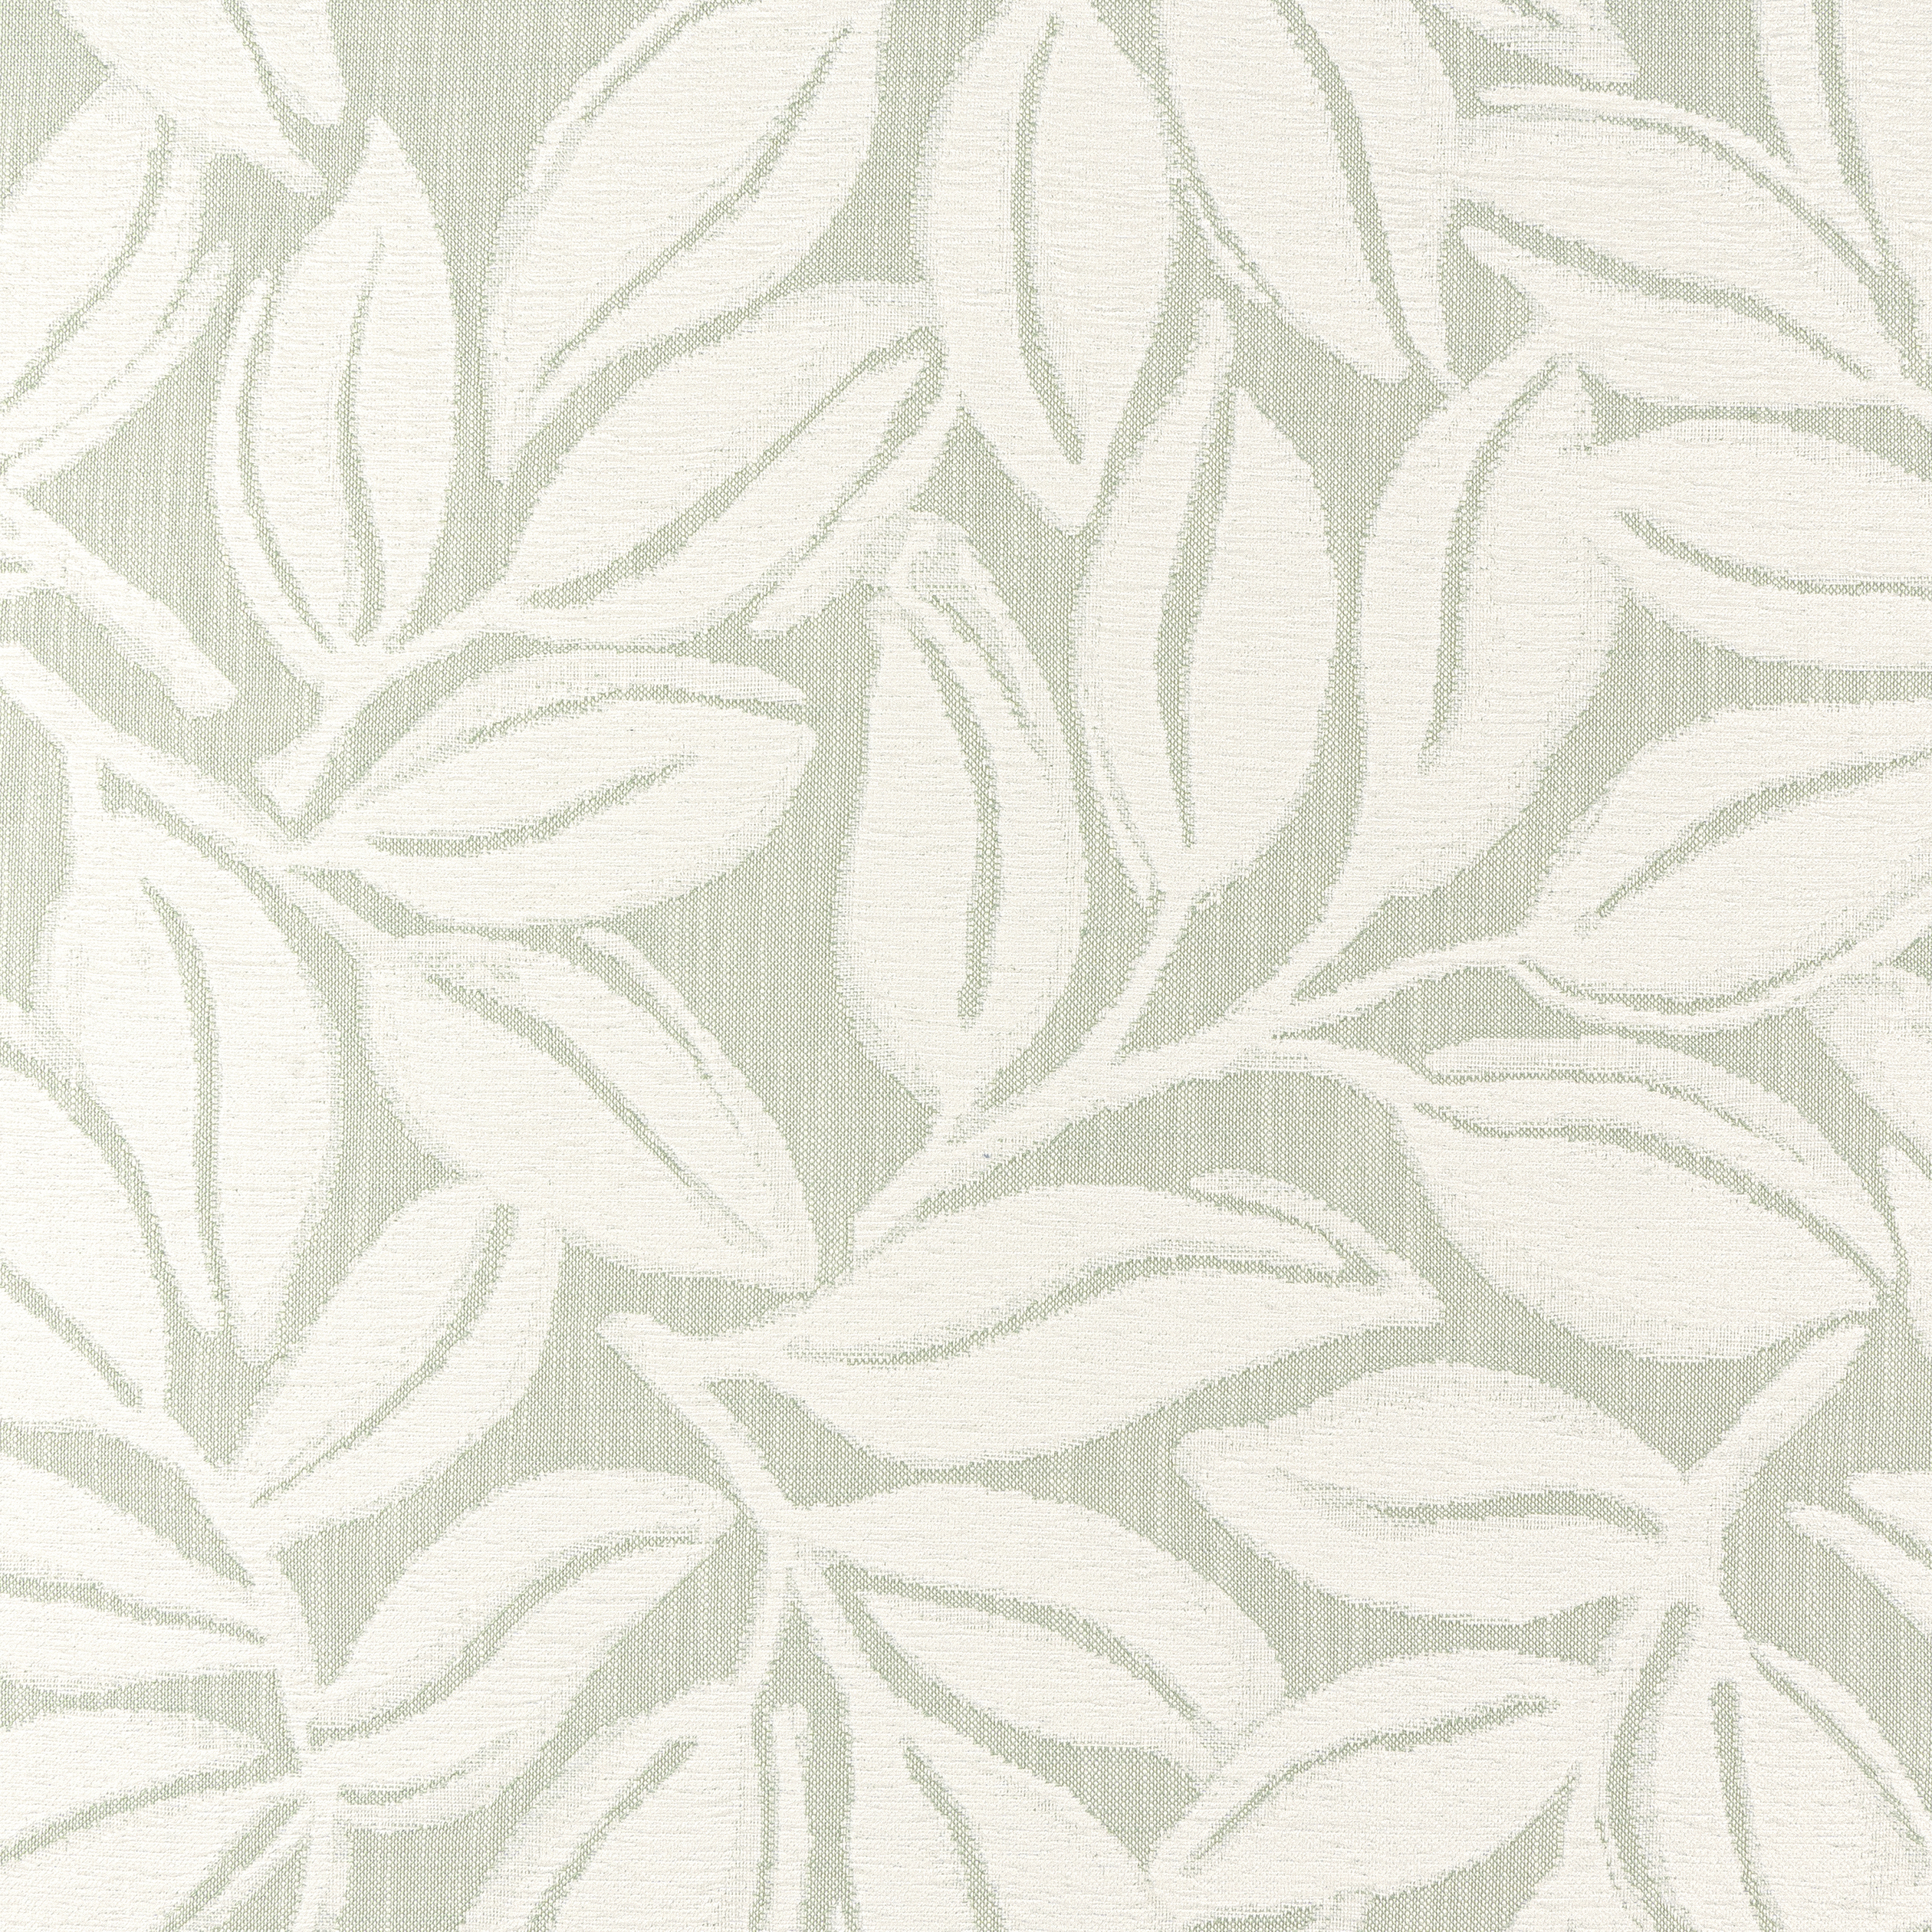 W8811 KONA Woven Fabrics Aloe from the Thibaut Haven collection